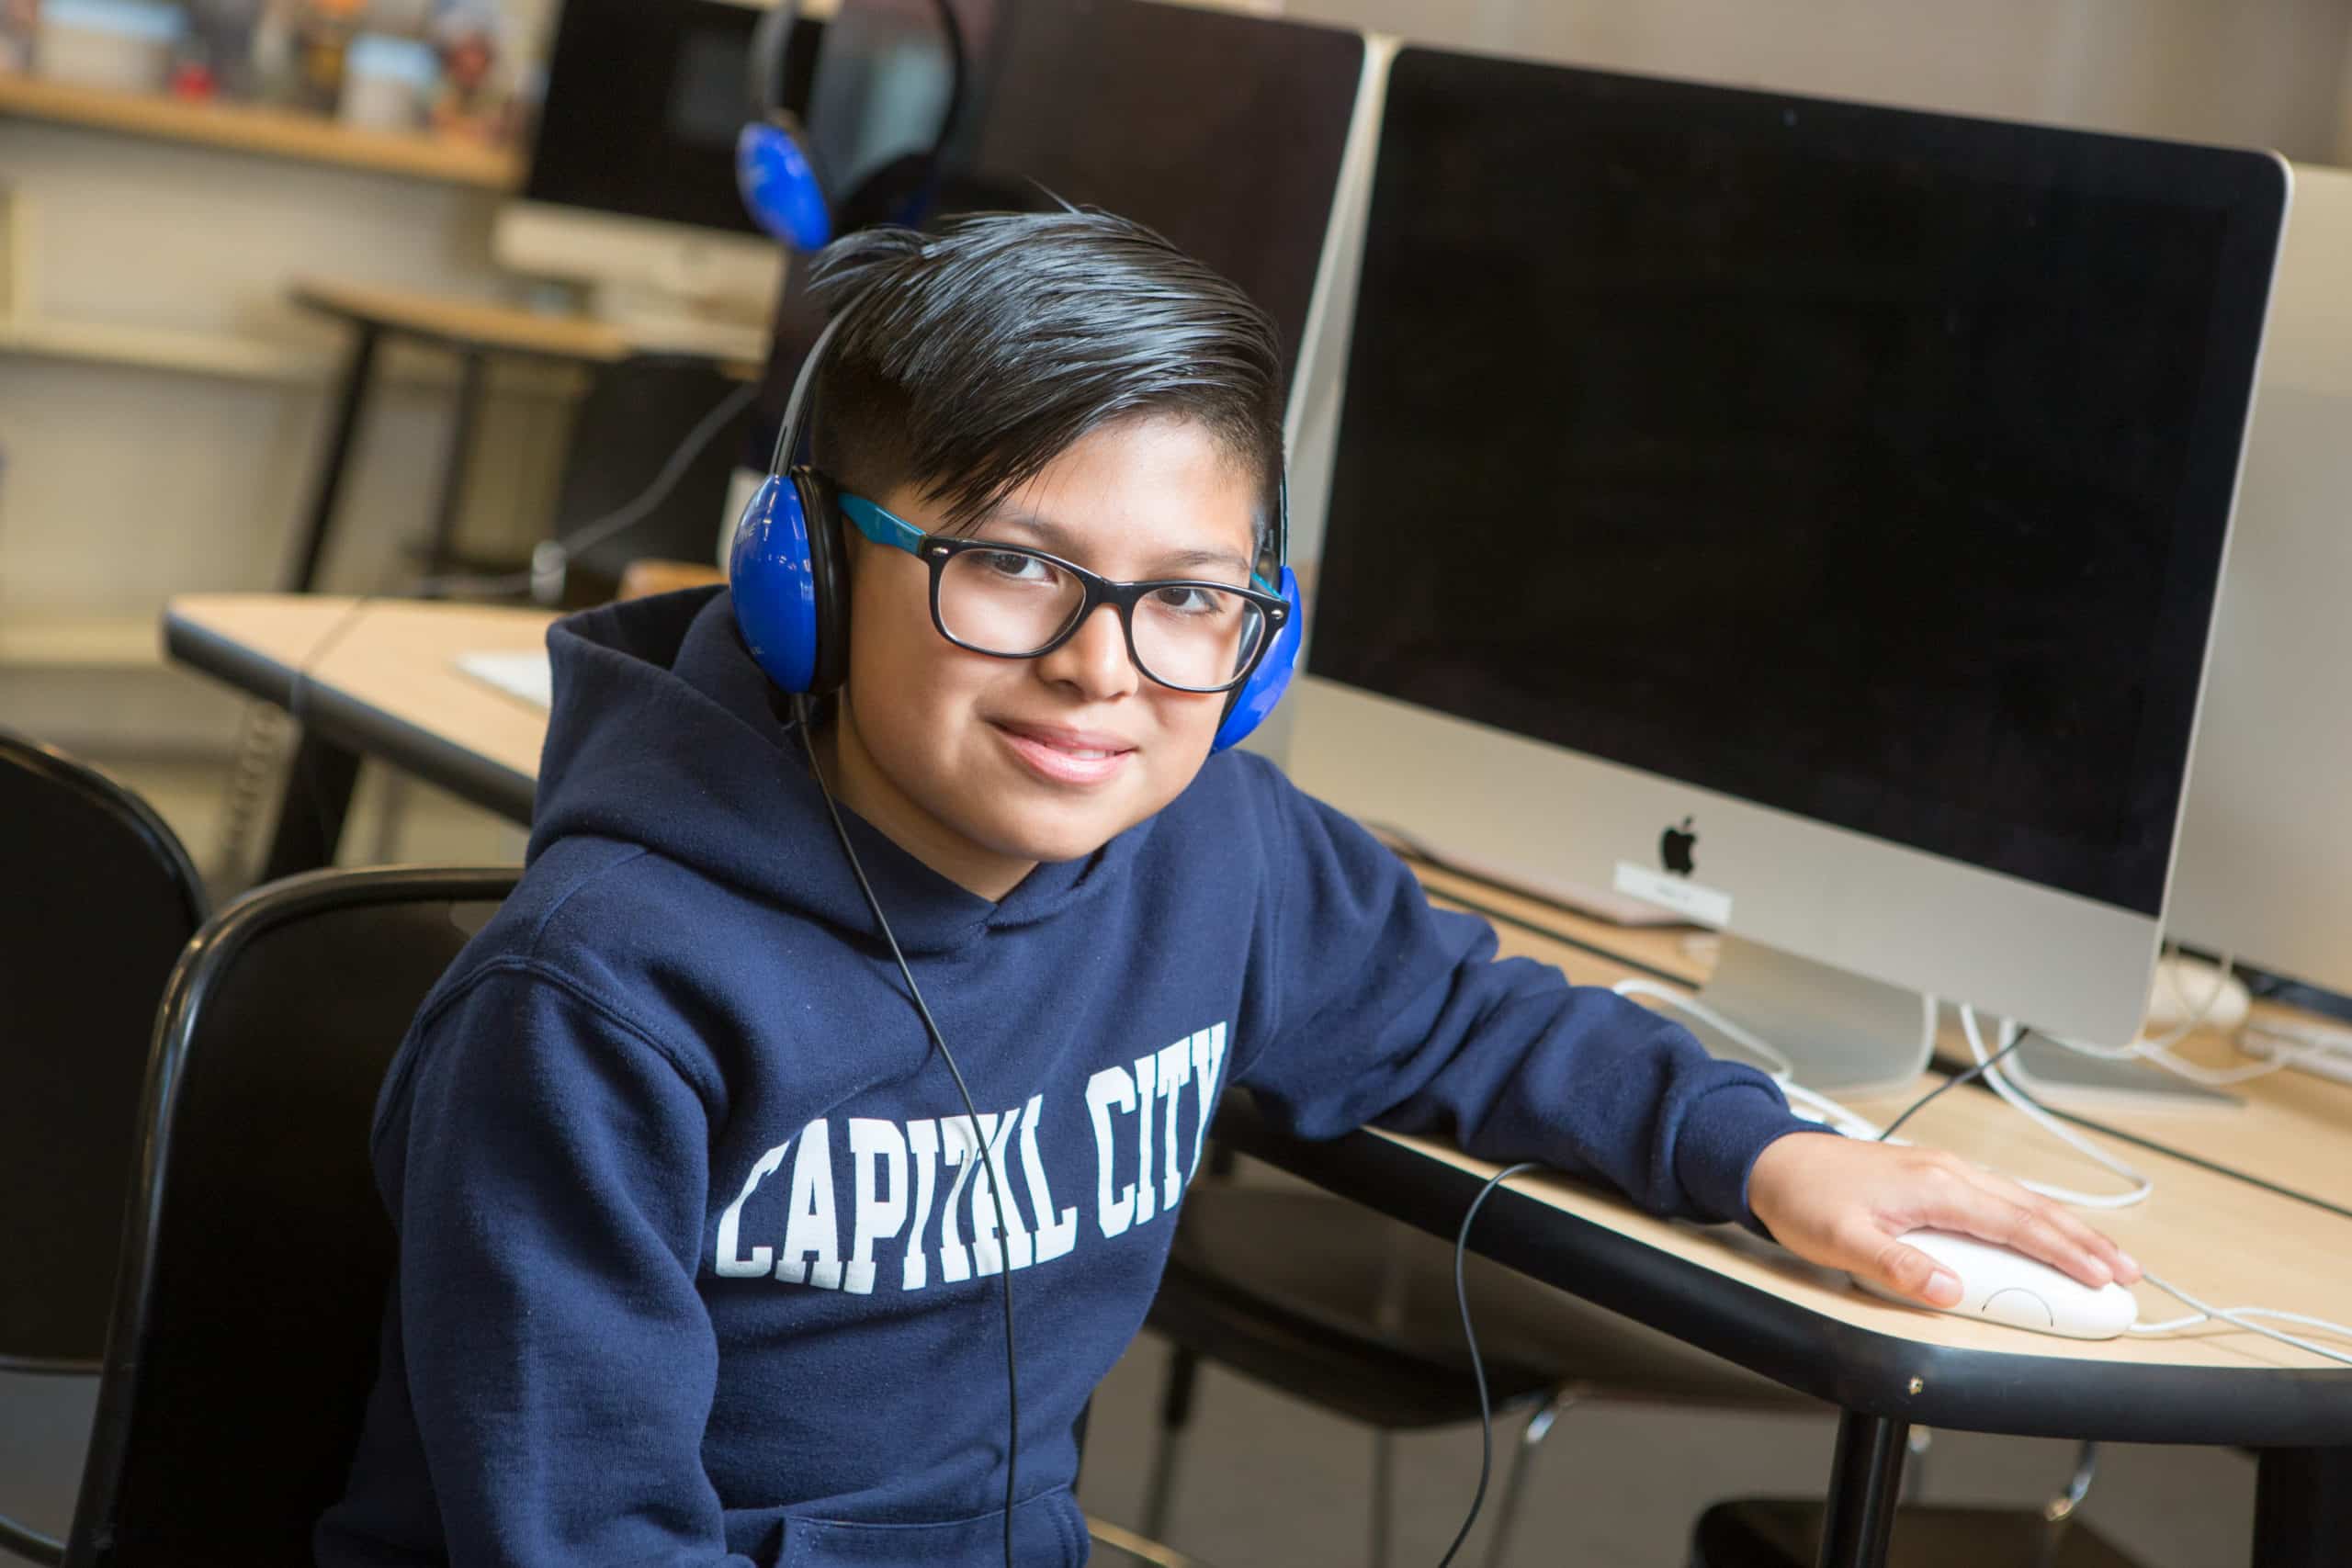 Middle school boy at computer